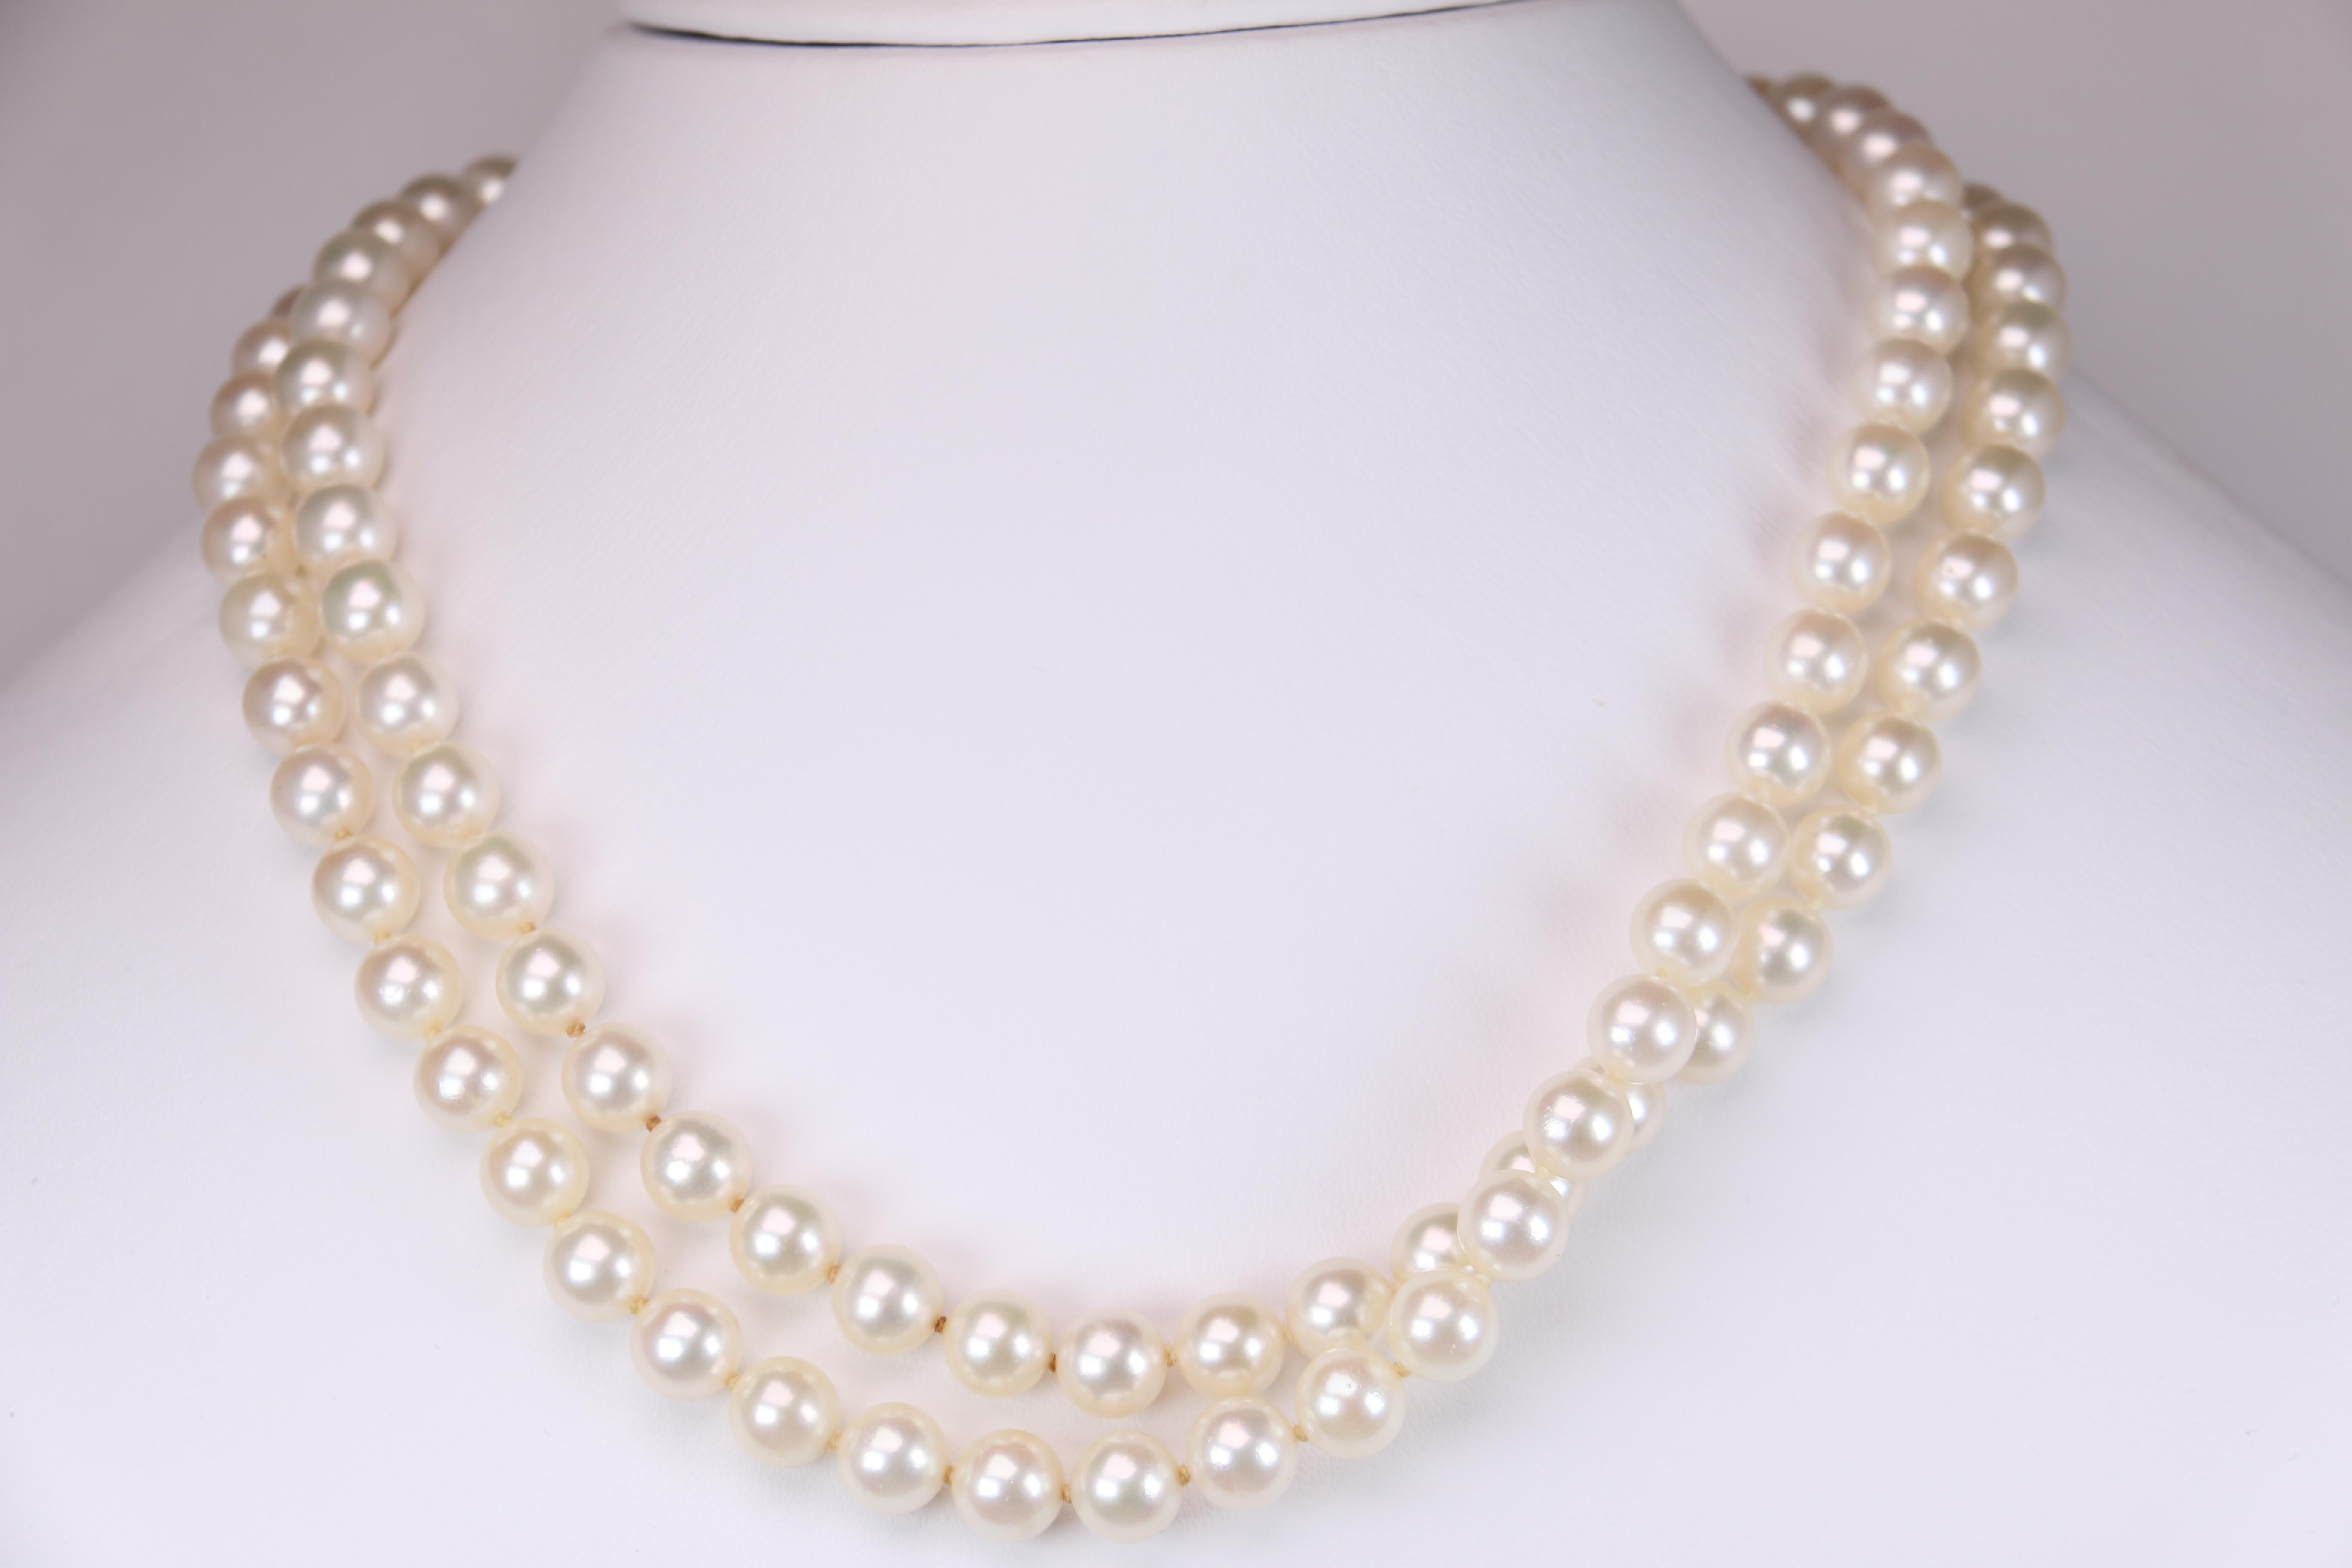 18K Yellow Gold Clasp on 35 inches of Pearls.  These Akoya Cultured Pearls are 35 inches long.  